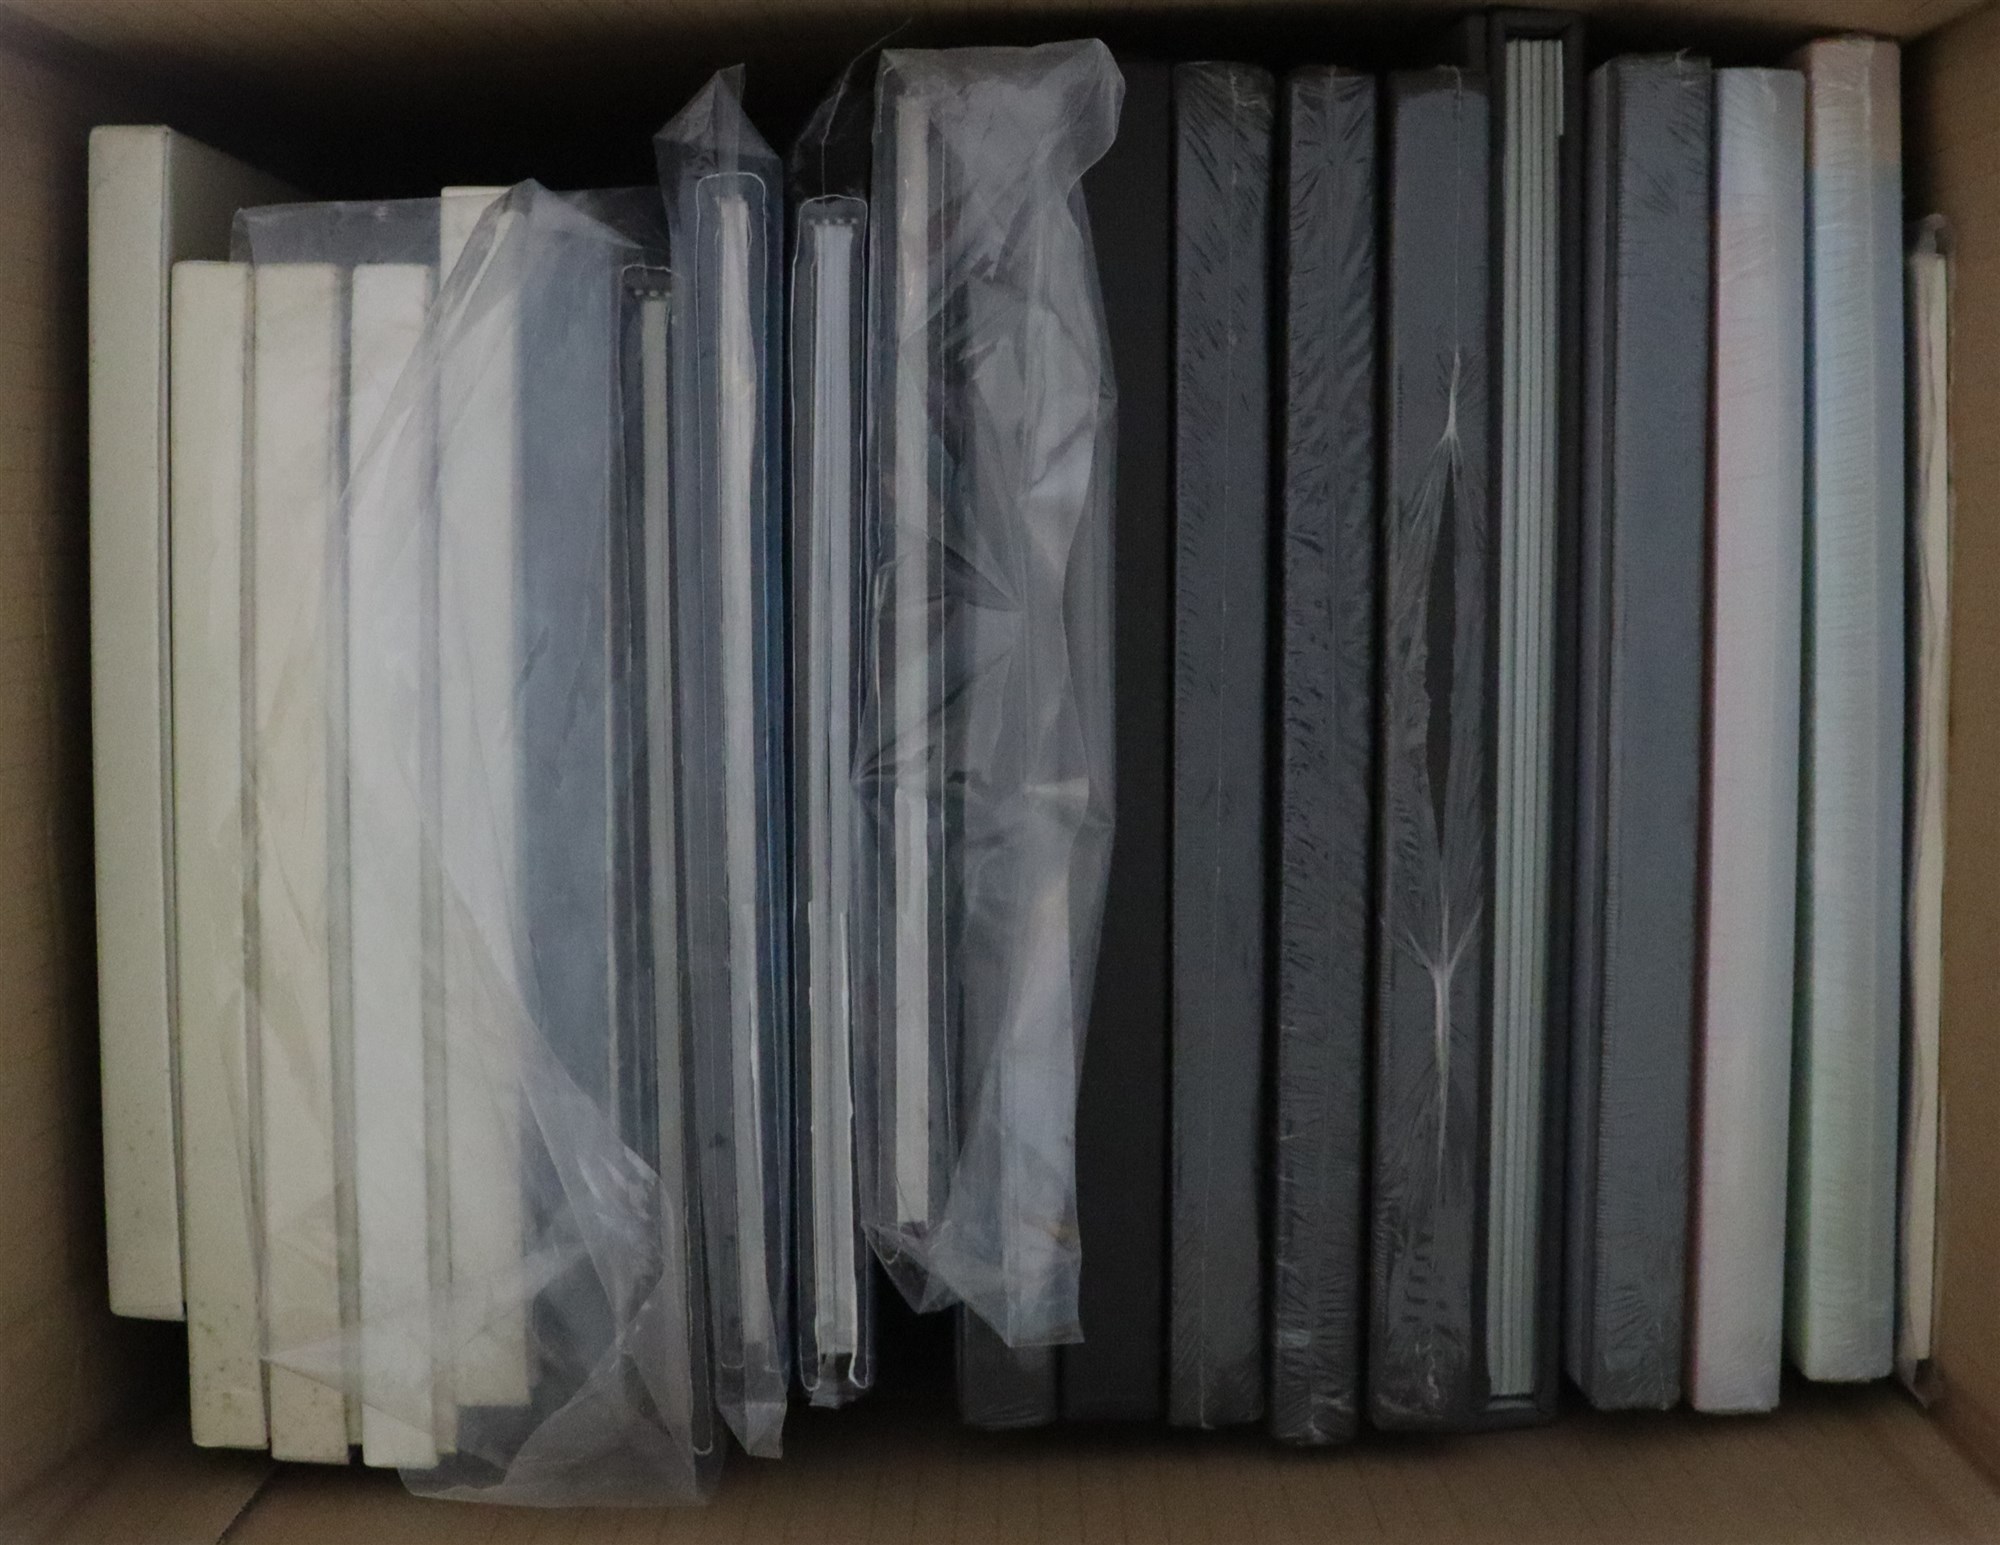 CANADA 1984 - 2003 YEARBOOKS. Missing 1994, including 1980. Some still sealed. (20) - Image 2 of 2